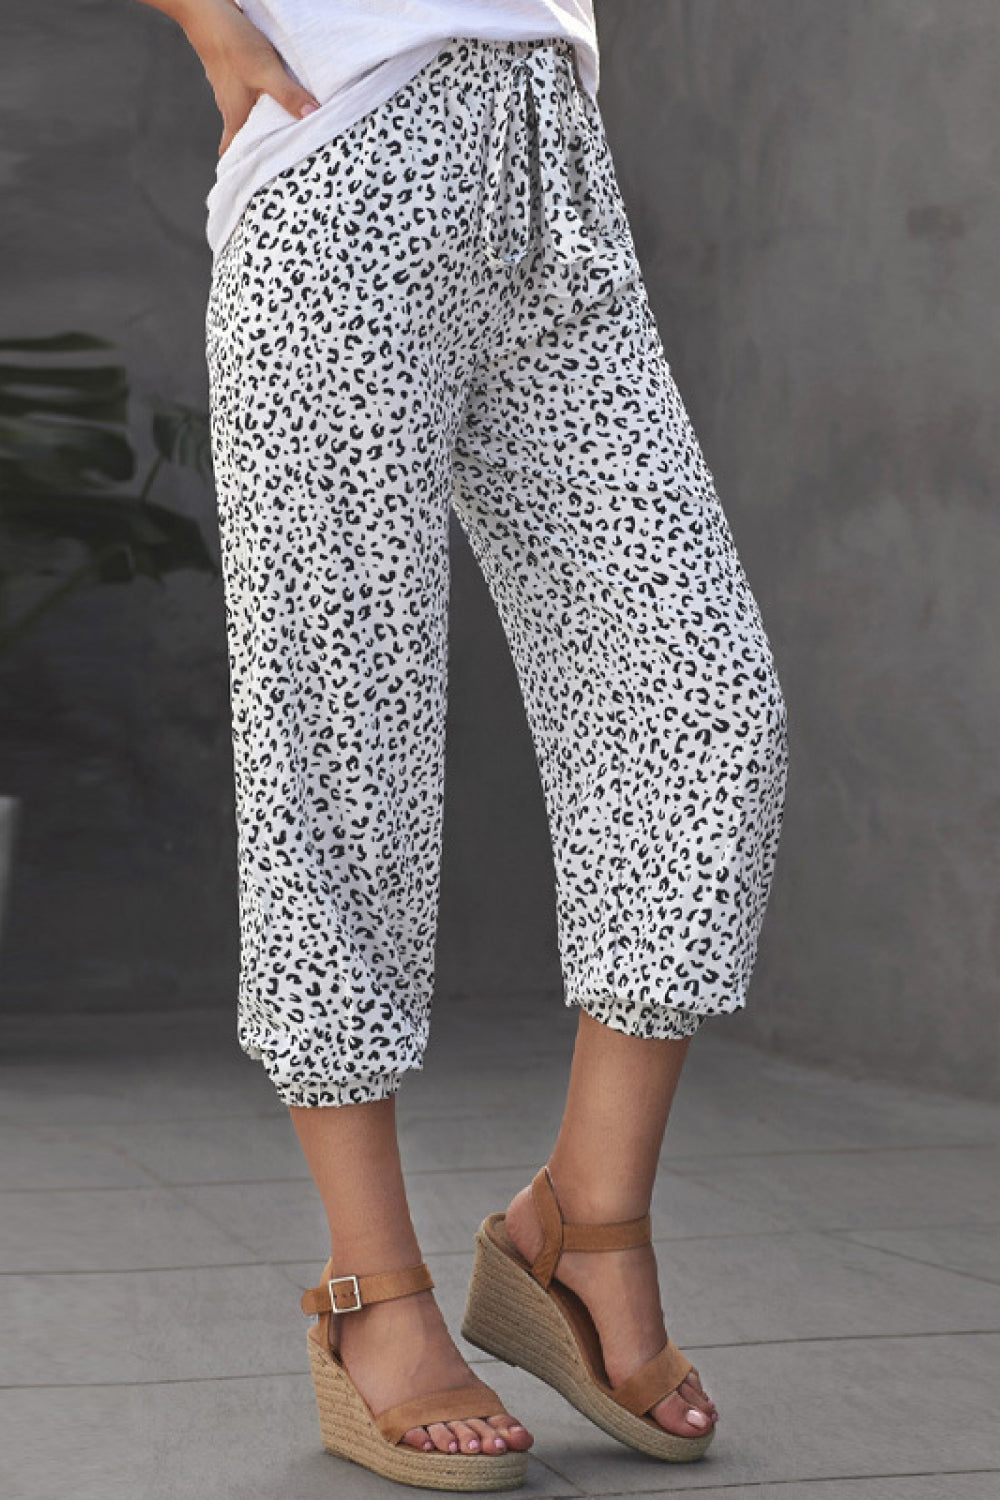 Buy Leopard Tie Waist Drawstring Jogger Pants by Sensual Fashion Boutique